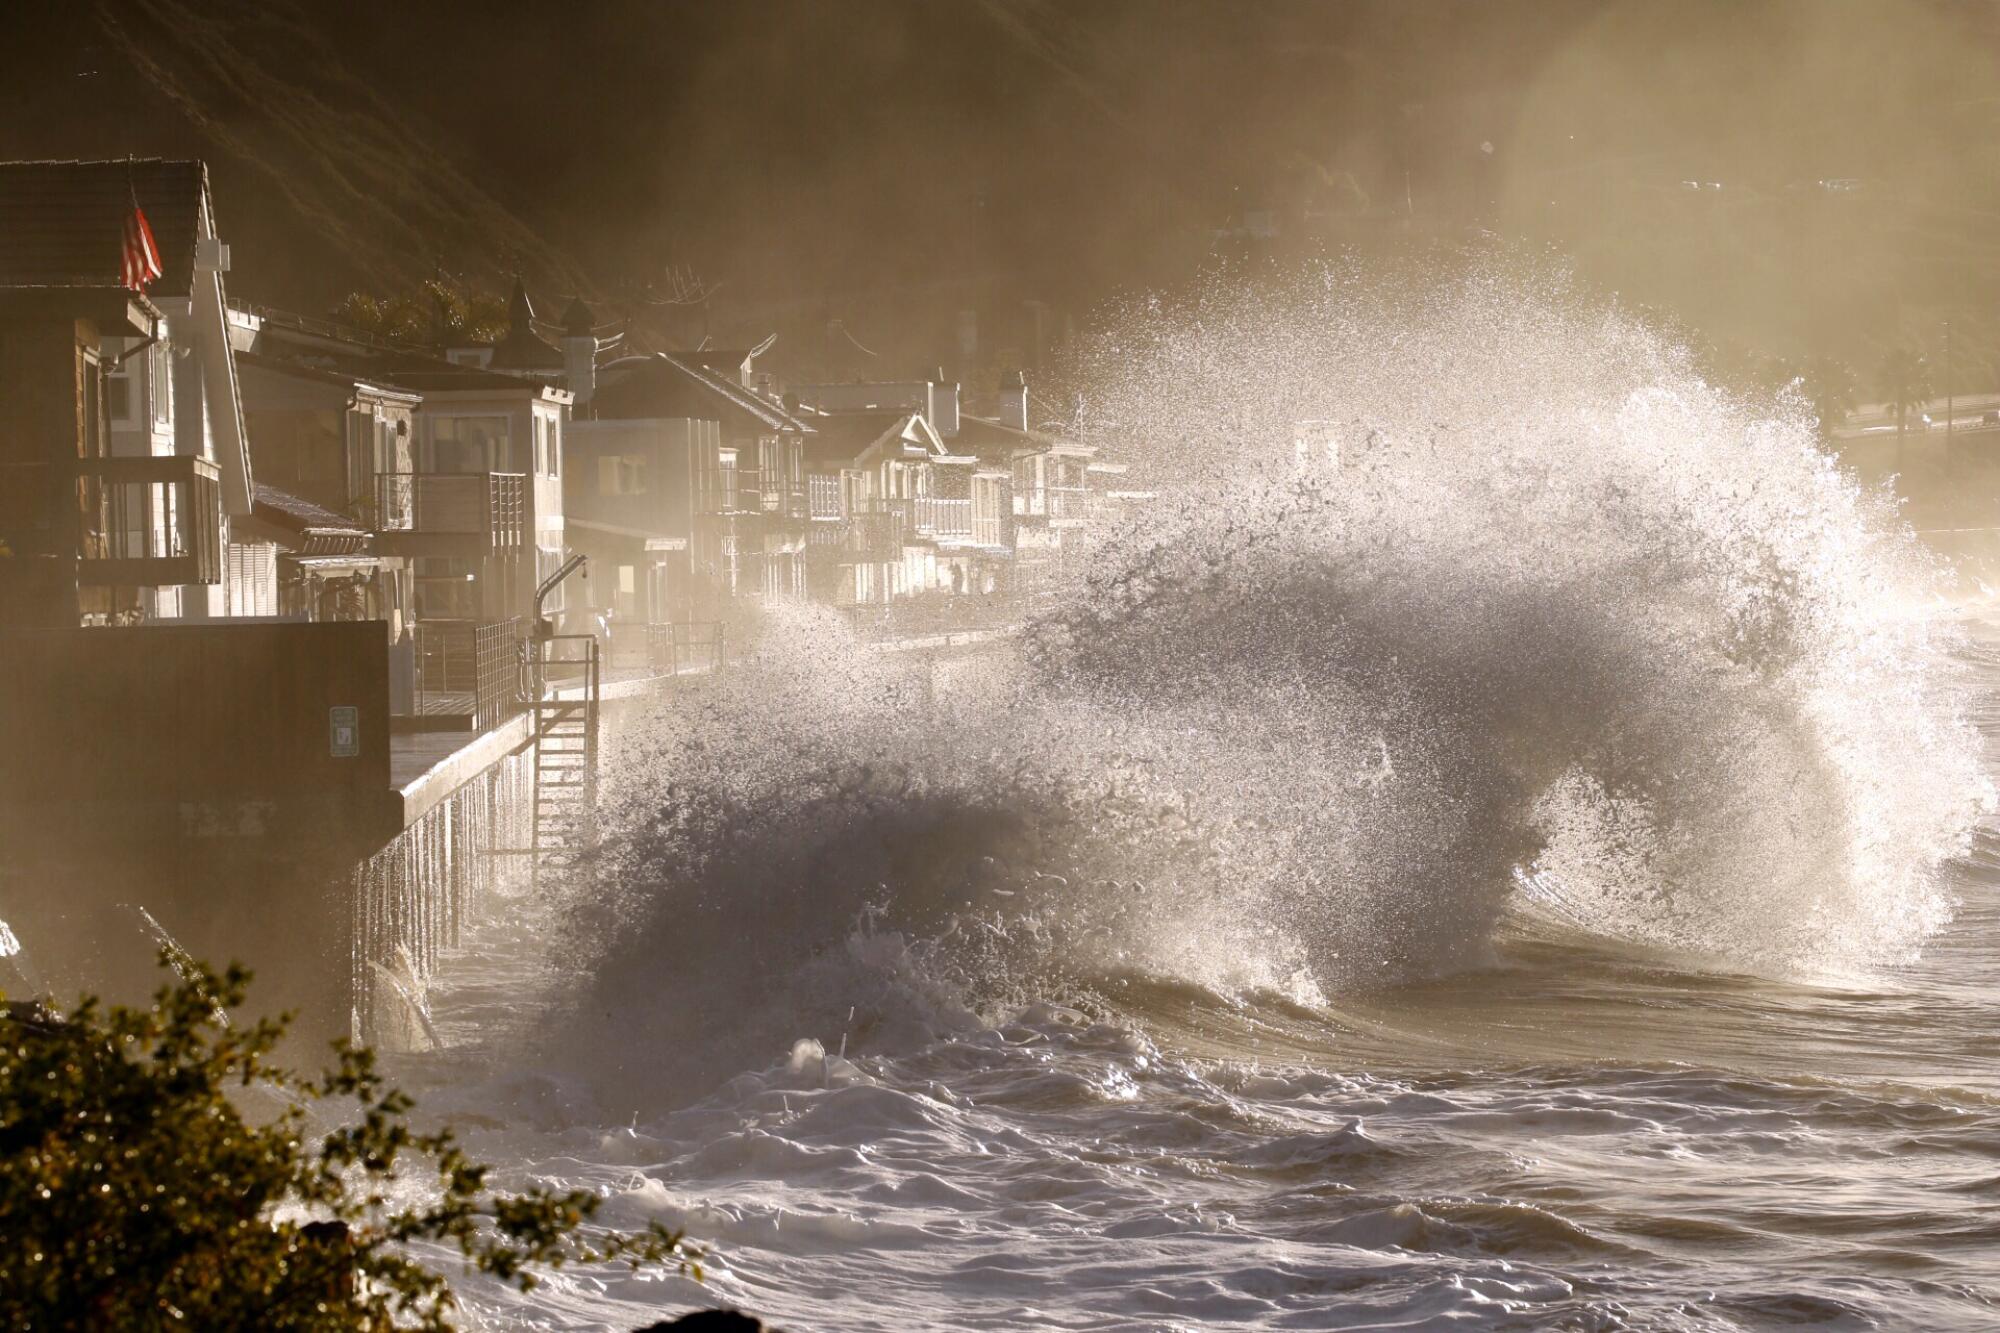 Enormous waves crash into a seawall near a residential community.